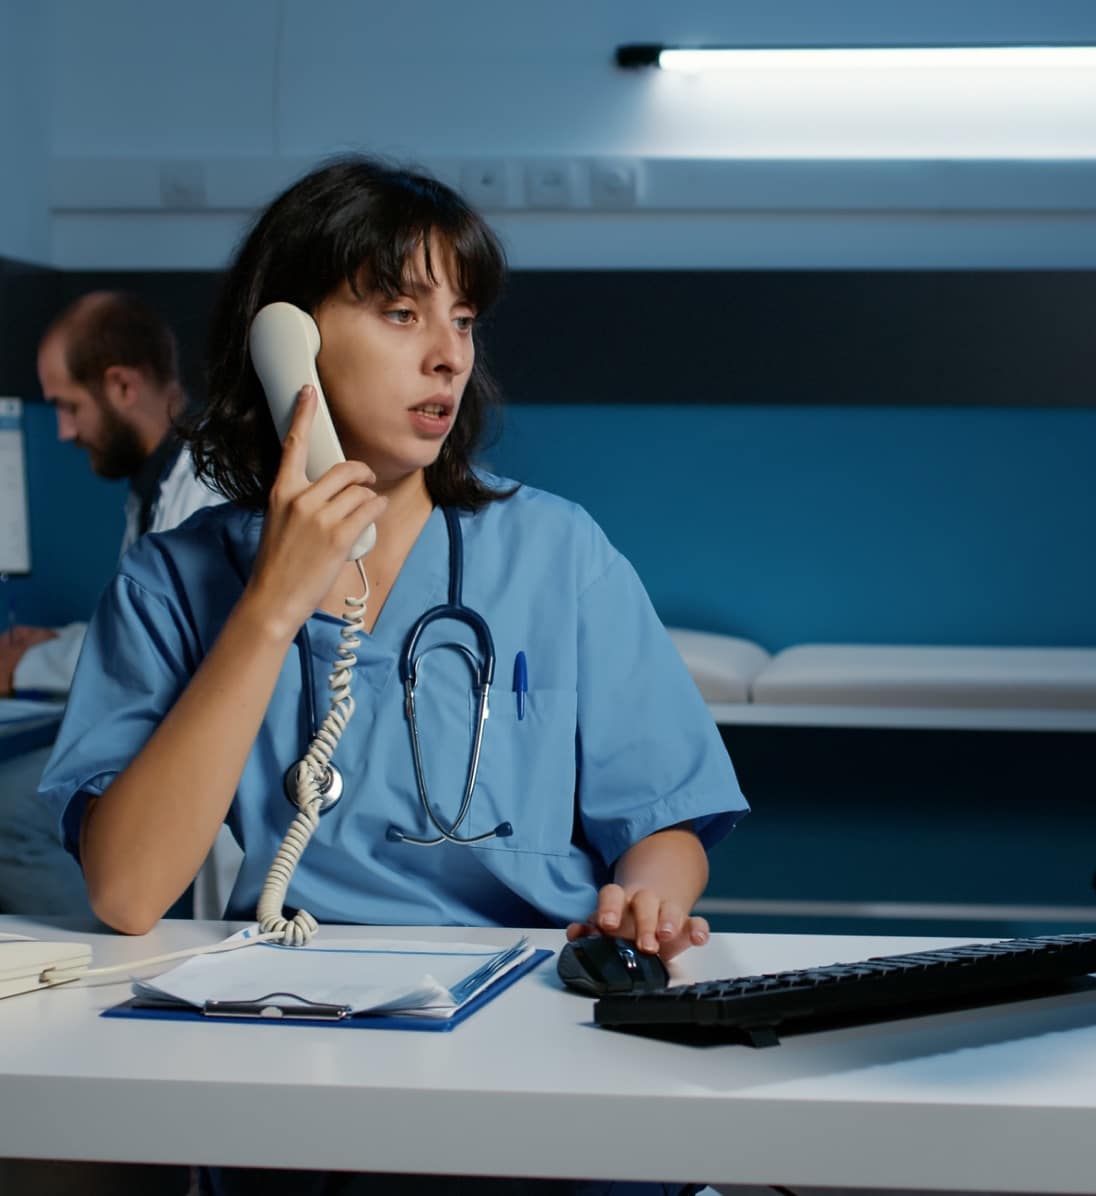 Medical provider standing at a desk, talking on a phone, while moving the mouse courser, looking over at computer screen.